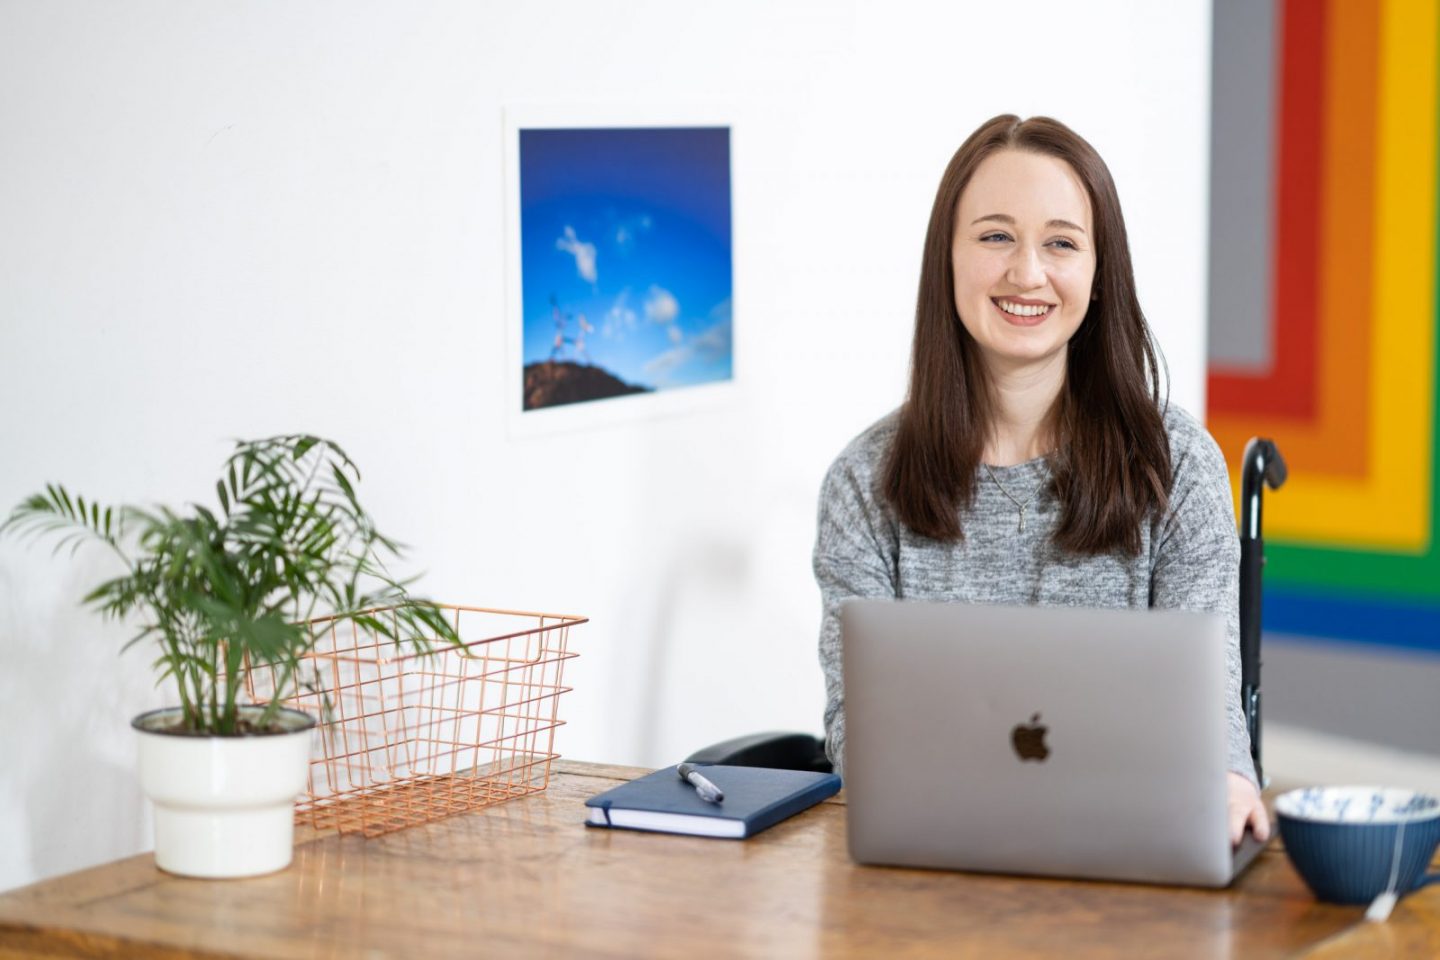 professional image of pippa sat at a desk with laptop open in front of her, looking off to the side and smiling